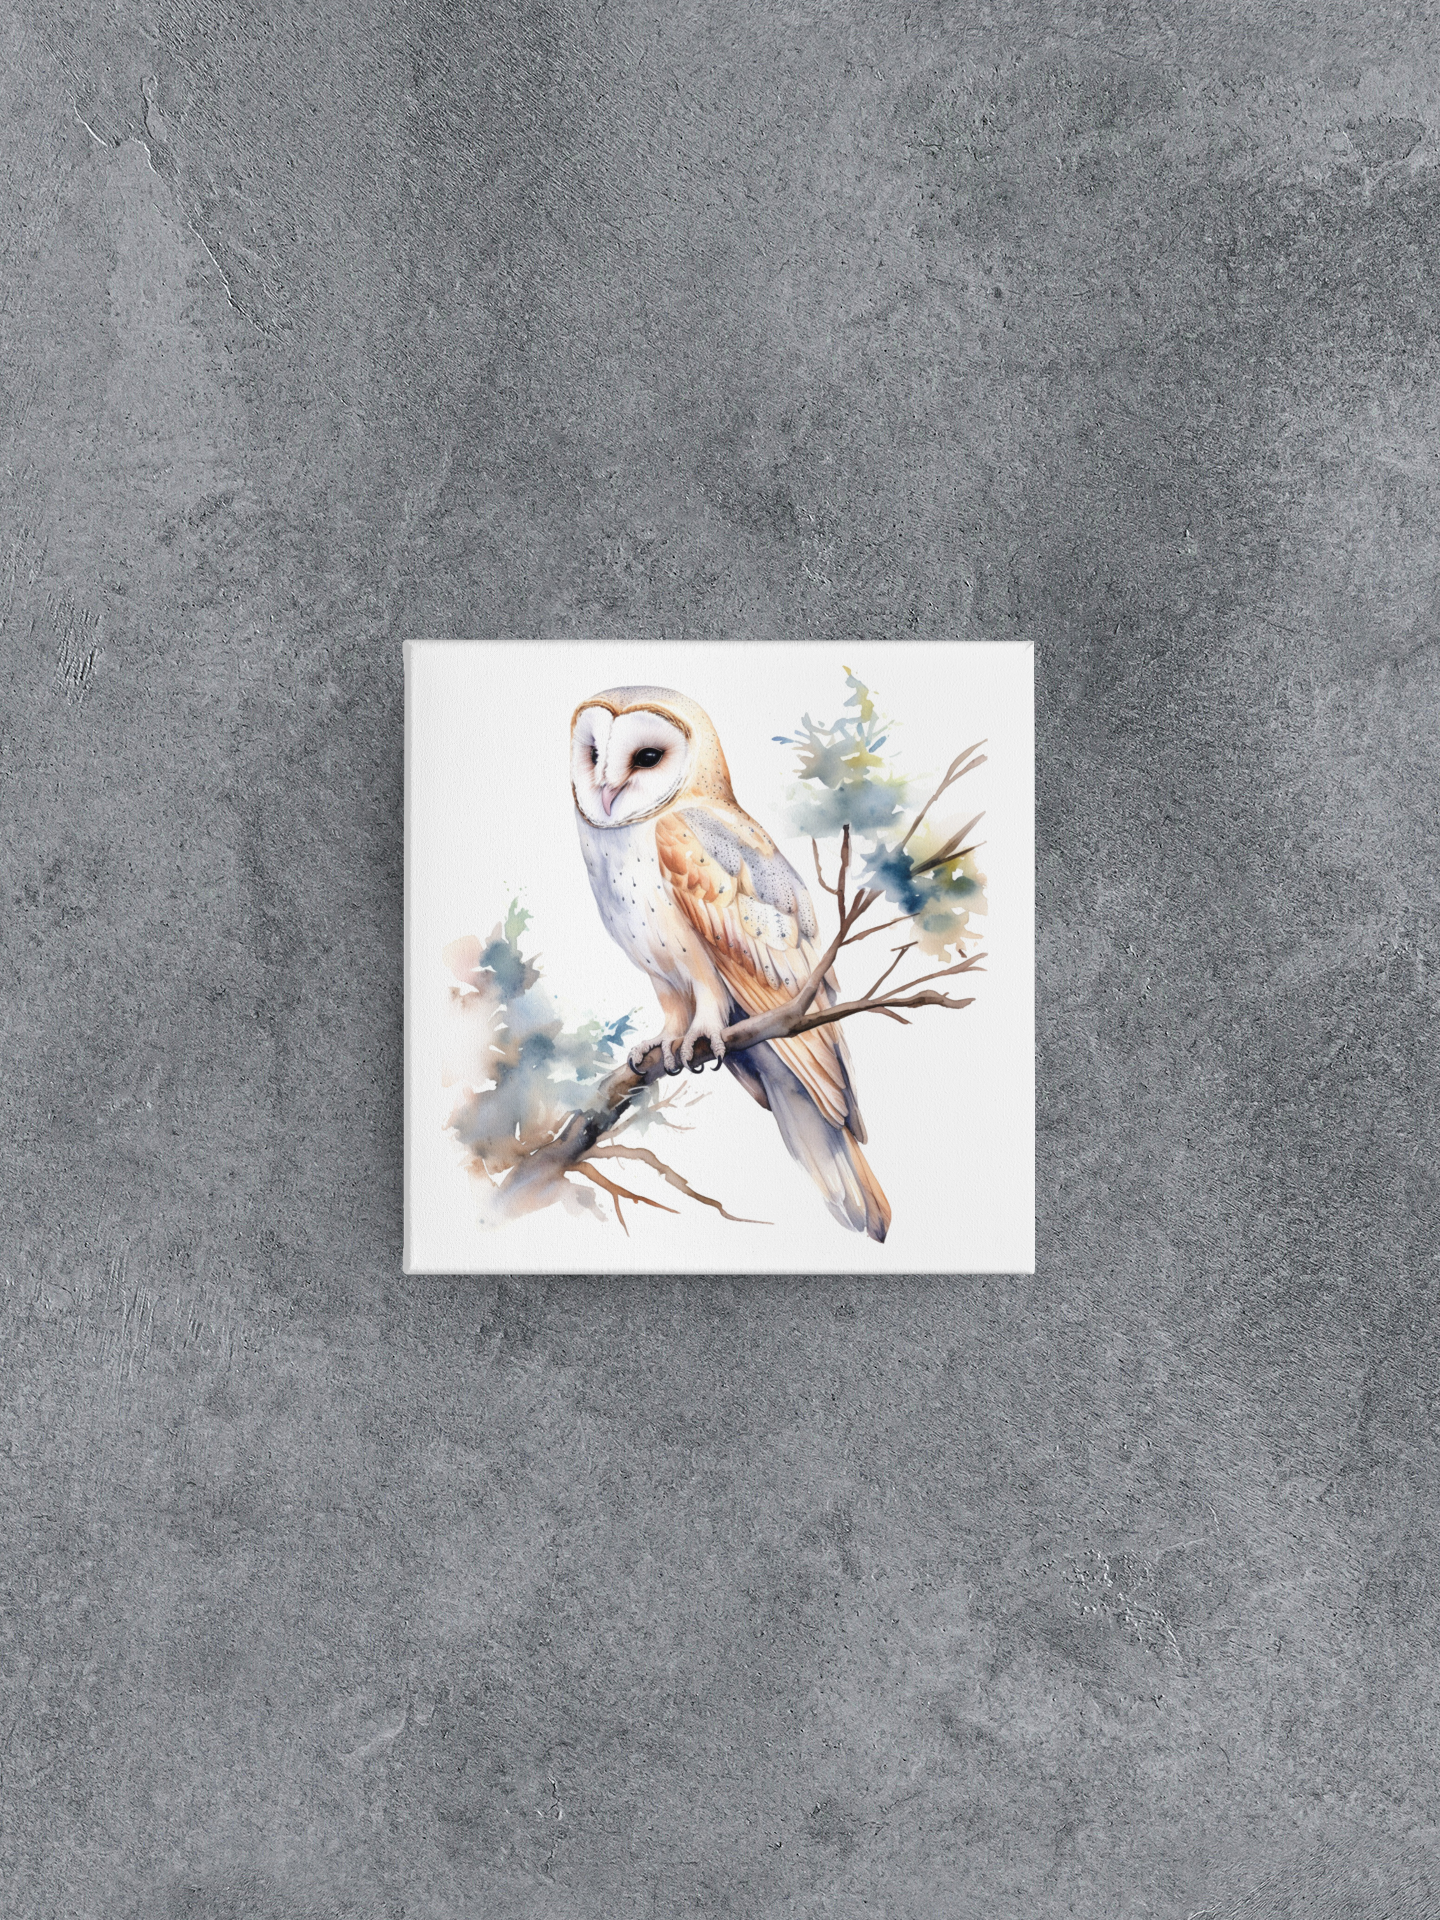 Barn Owl Canvas Wall Art, Watercolor Barn Owl Painting, Barn Owl on Branch, Nature Canvas Art, Bird Lover Gift, Ready to Hang